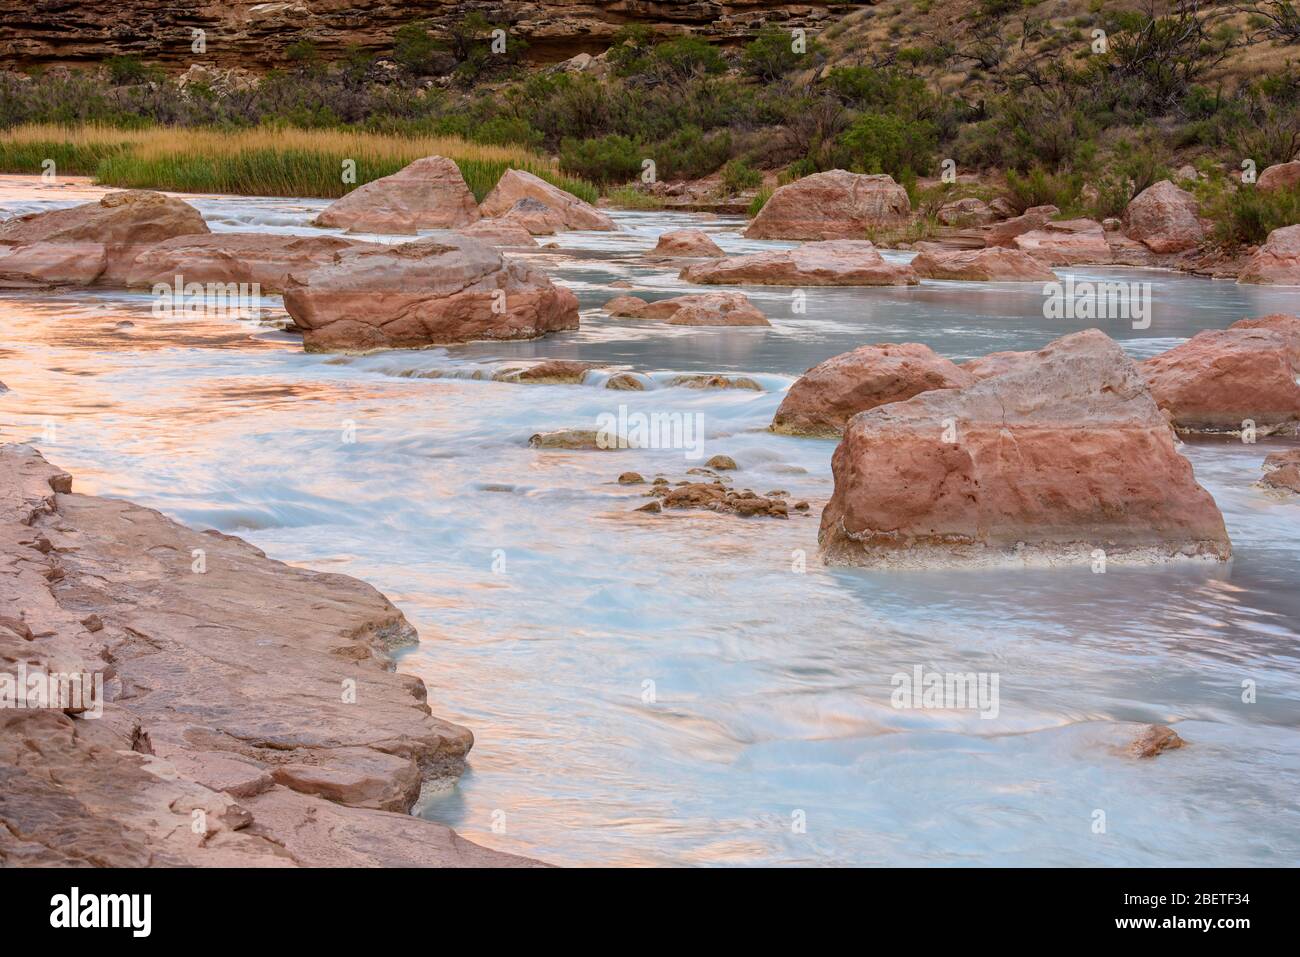 Flowing water and exposed rocks in the Little Colorado River, Grand Canyon National Park, Arizona, USA Stock Photo